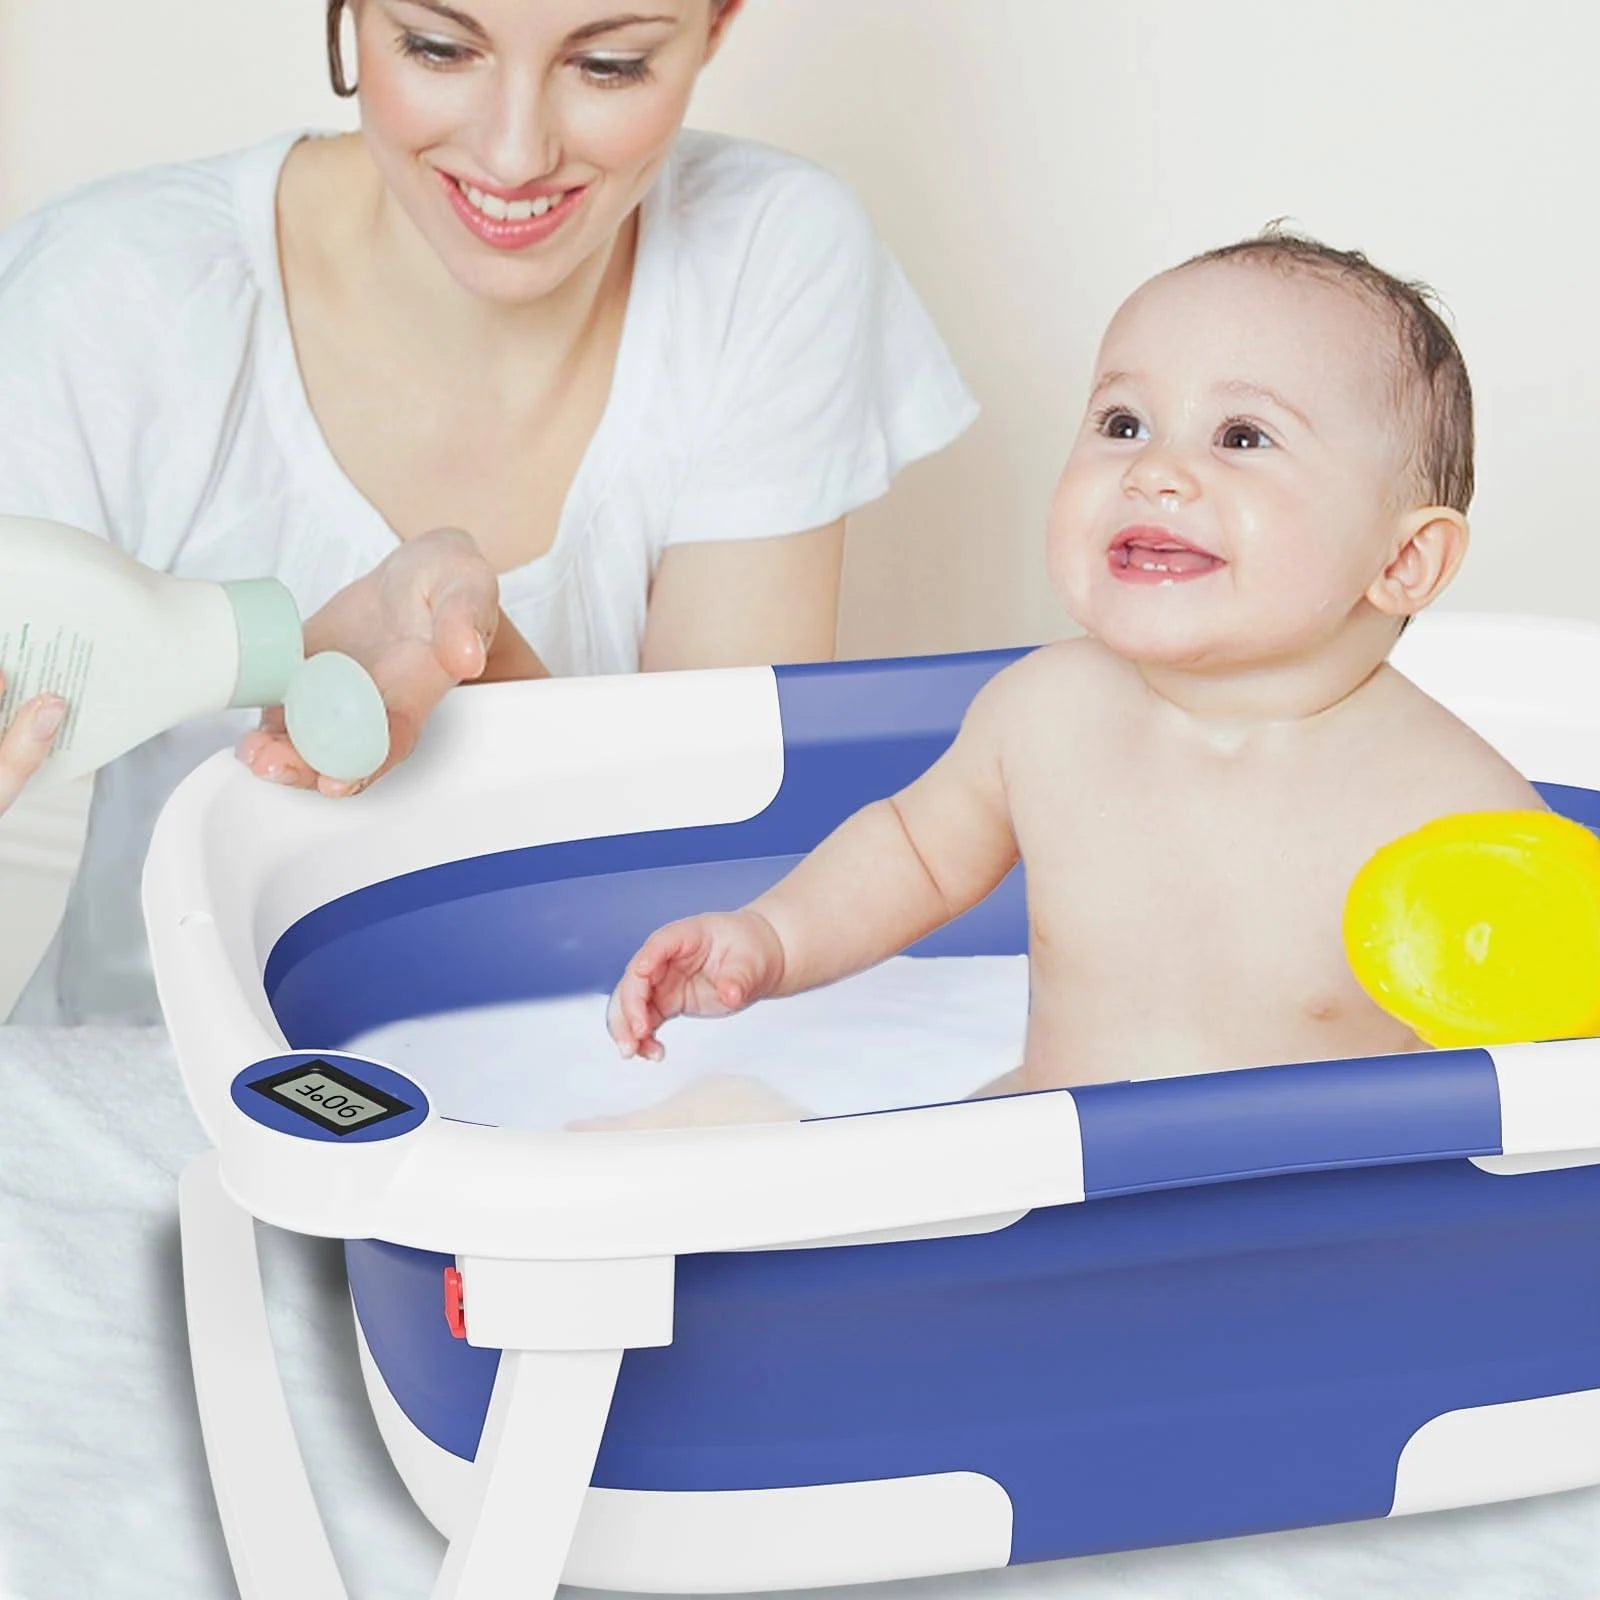 Blue Baby bath Tub With Thermometer